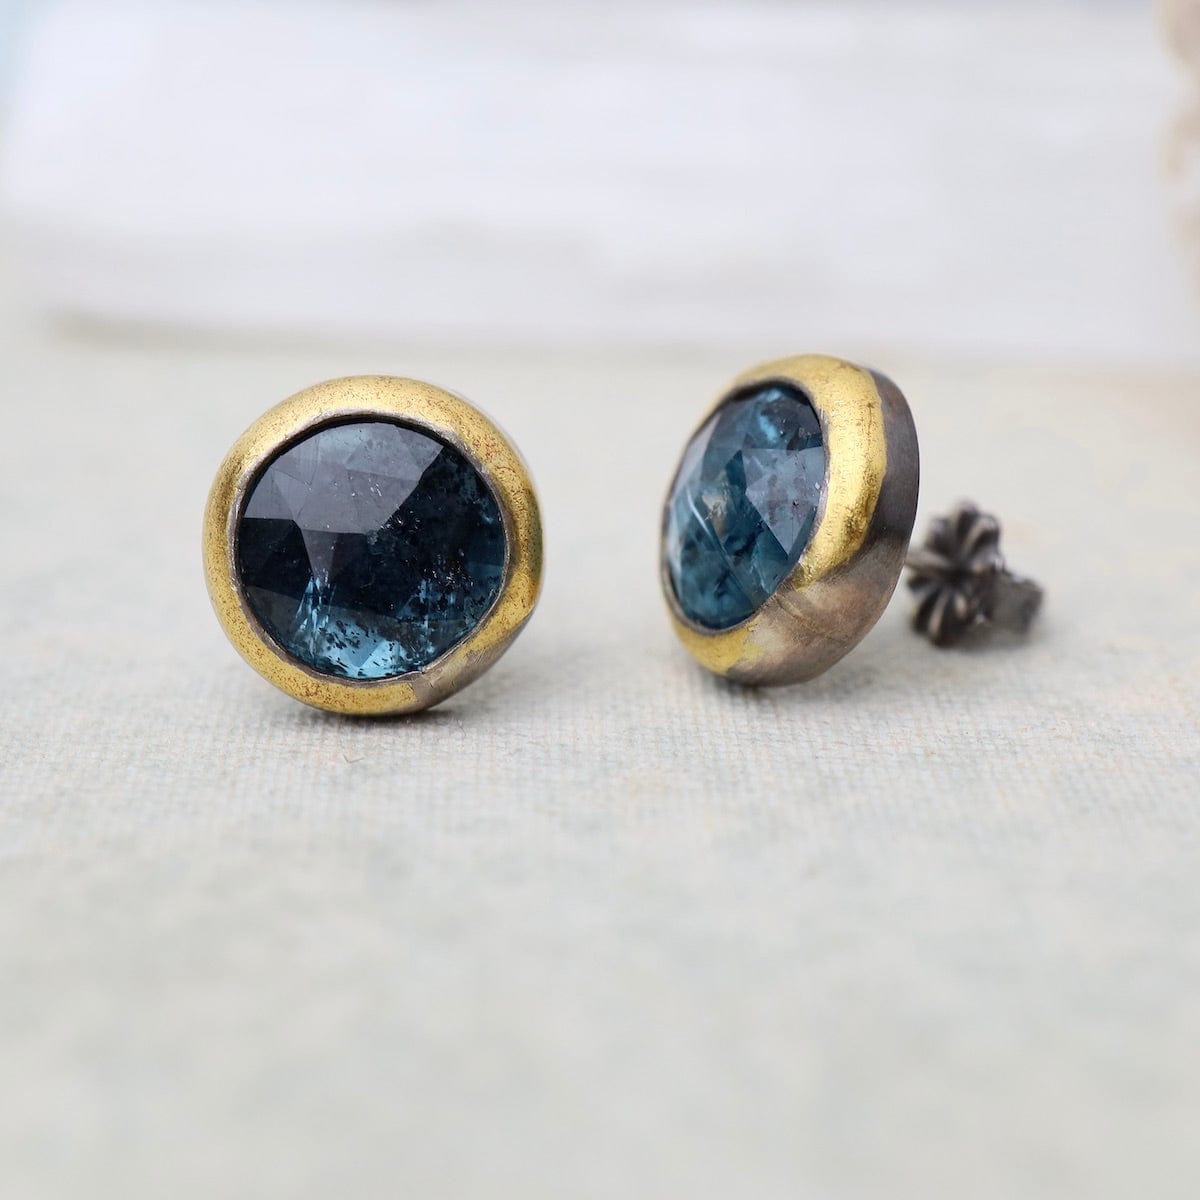 EAR Small Crescent Rim Post Earrings with Teal Kyanite